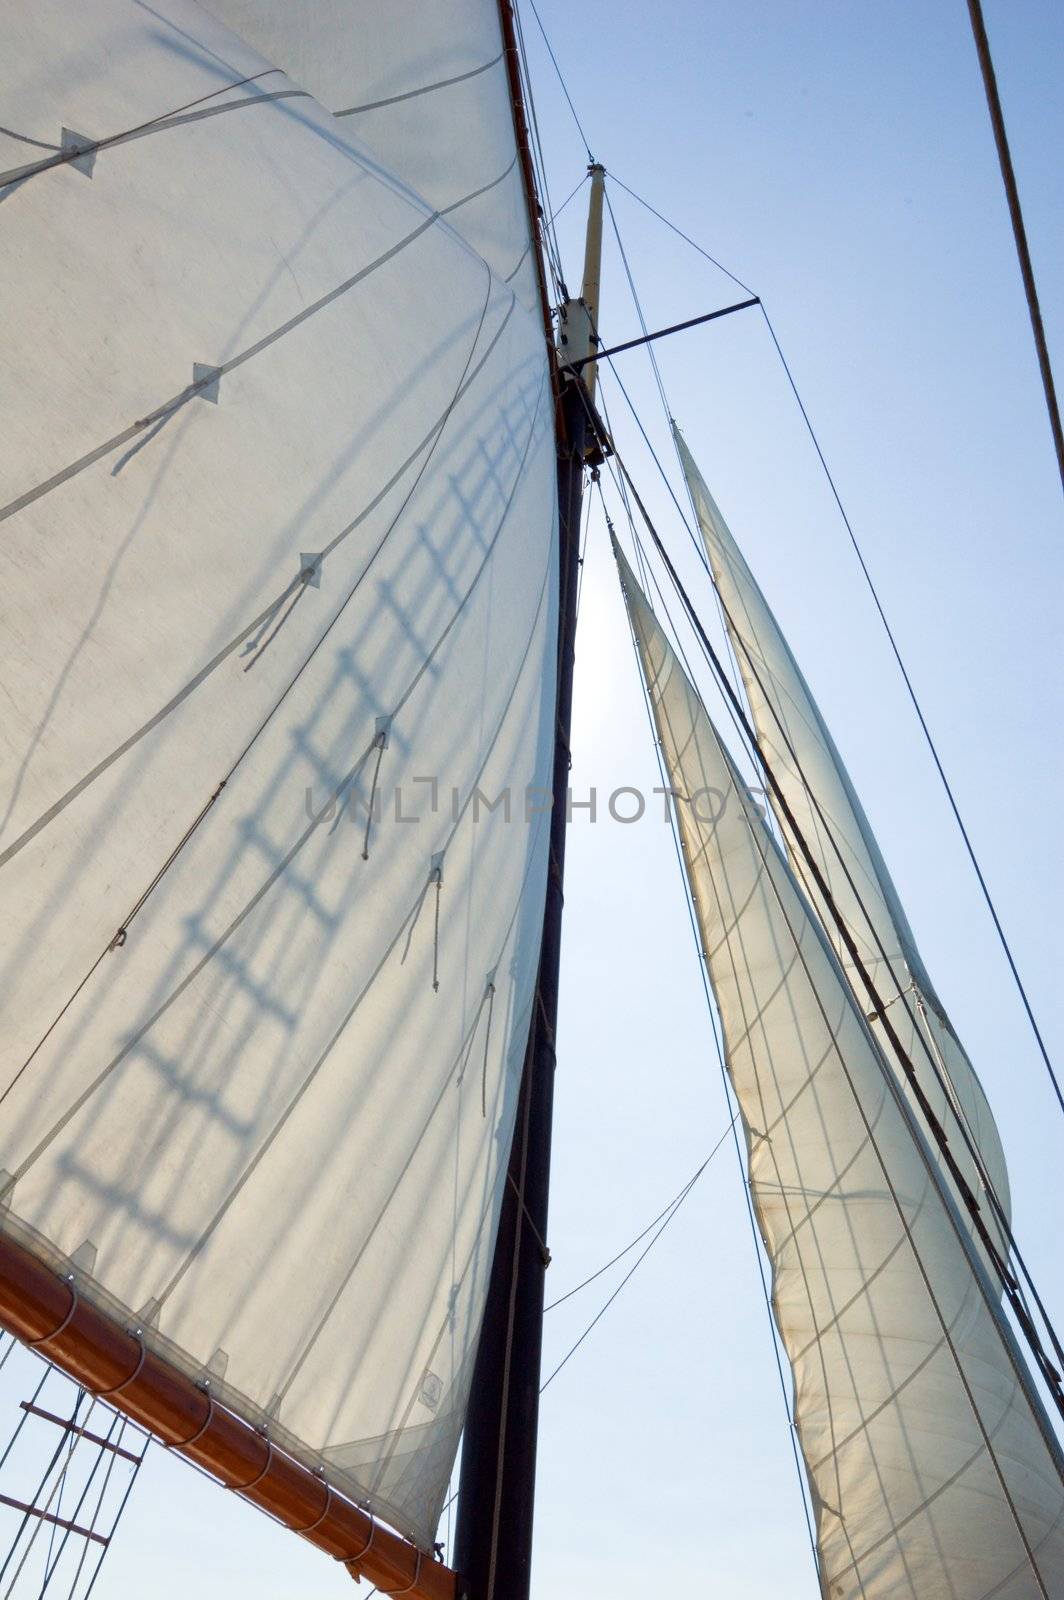 Big sails and masts on blue sky background